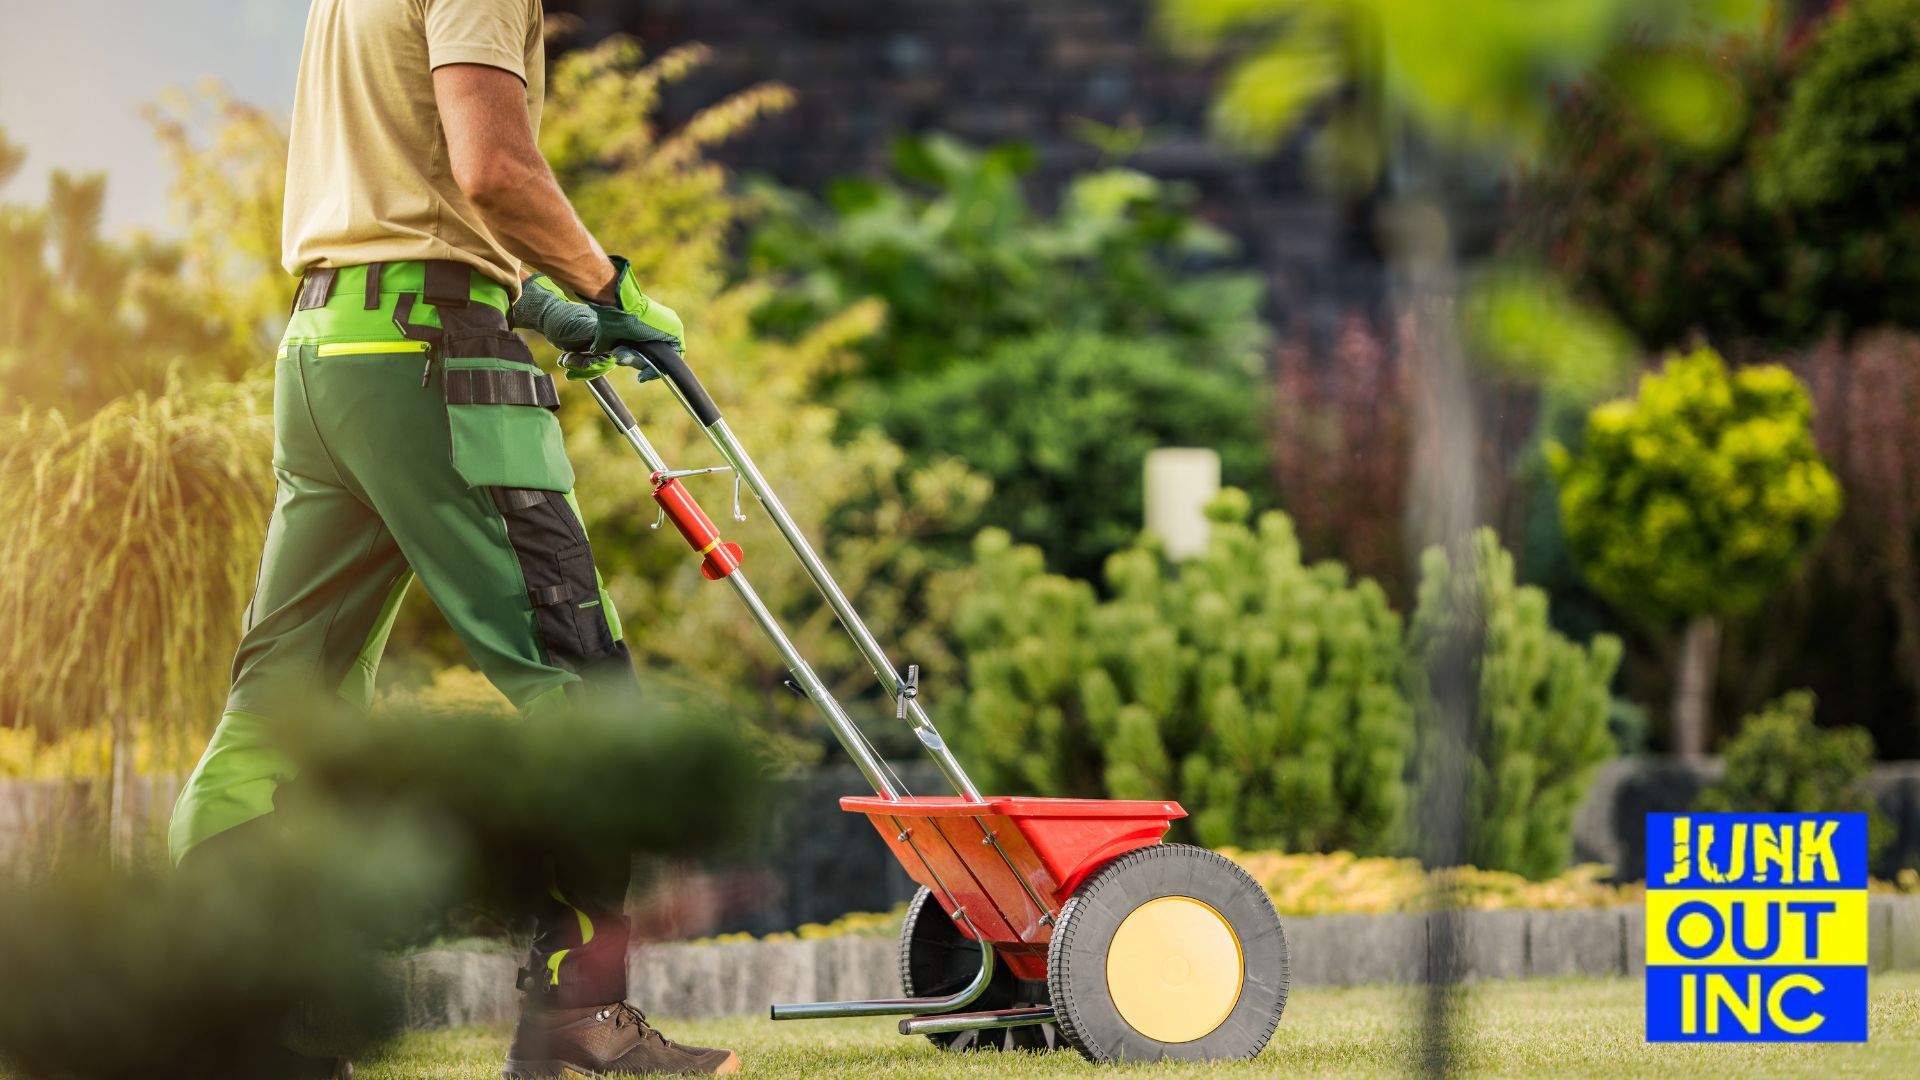  It includes tasks like picking up trash, removing dead branches, and clearing walkways of clutter.